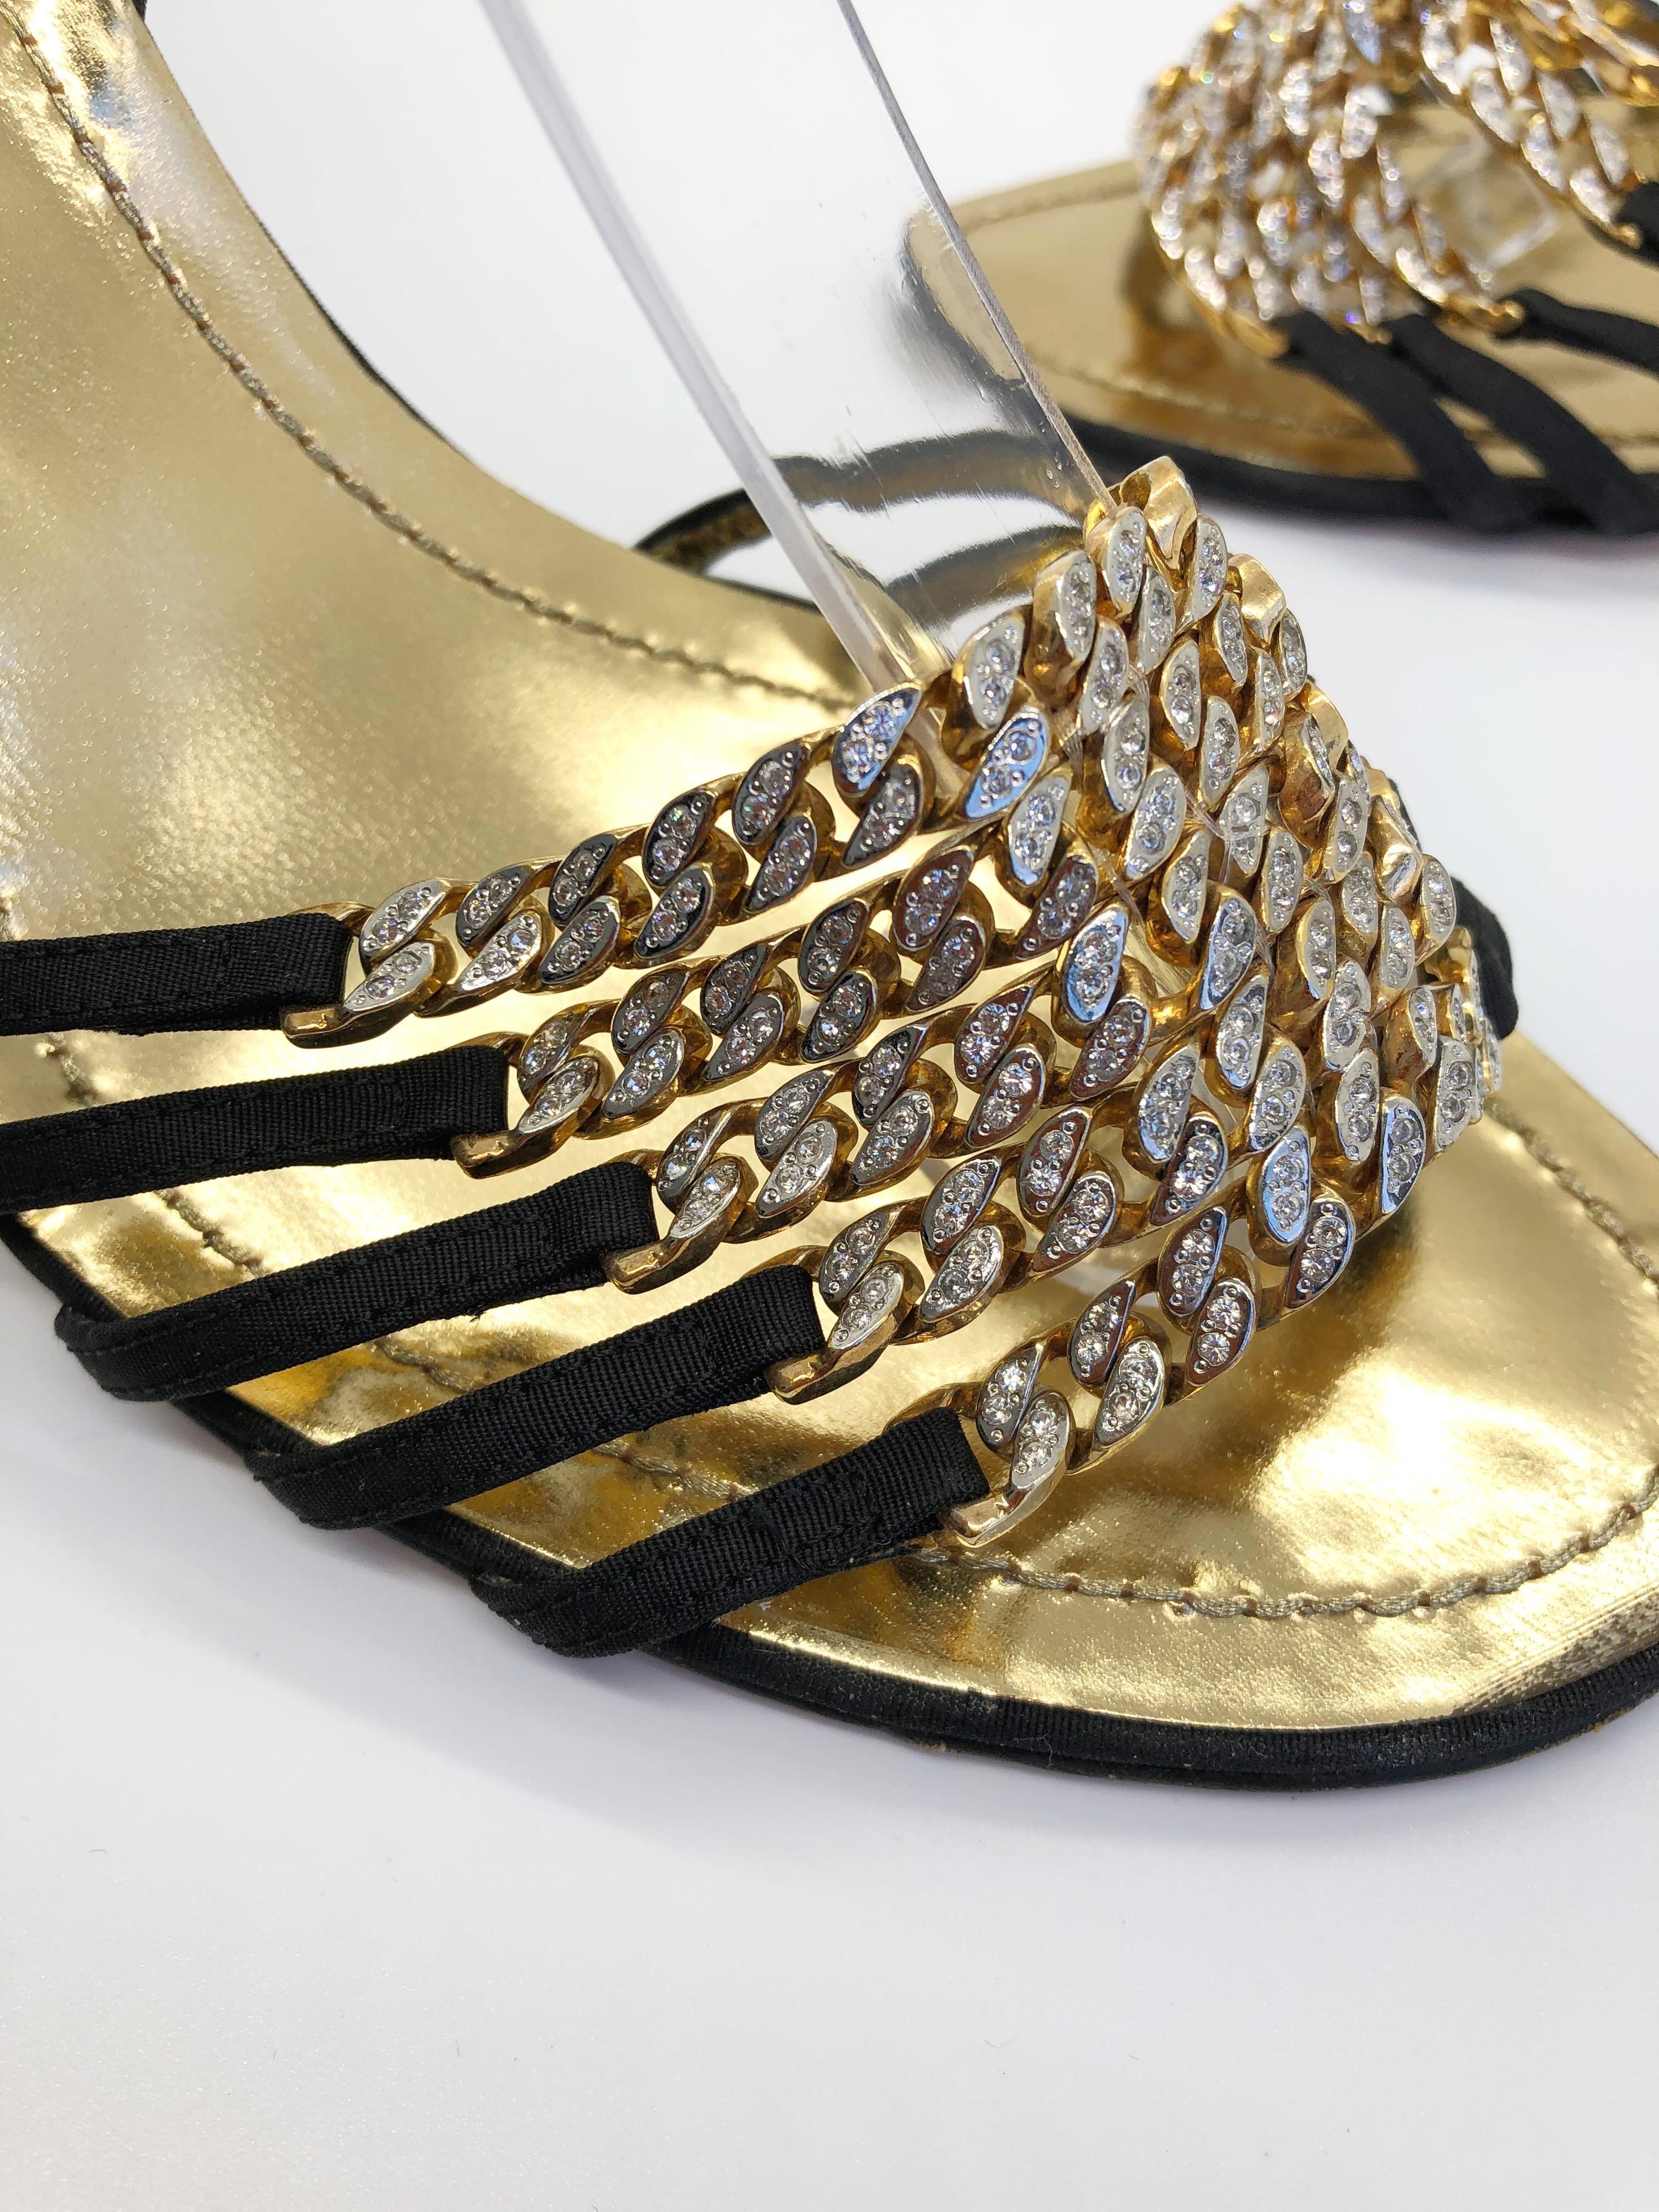 Gorgeous RENE CAOVILLA Size 38.5 / US 8.5 black and gold rhinestone strappy high heel sandals ! Features black silk grosgrain straps with gilted gold metal hardware. Thousands of rhinestones on the gold chainlink straps. Adjustable buckle on the